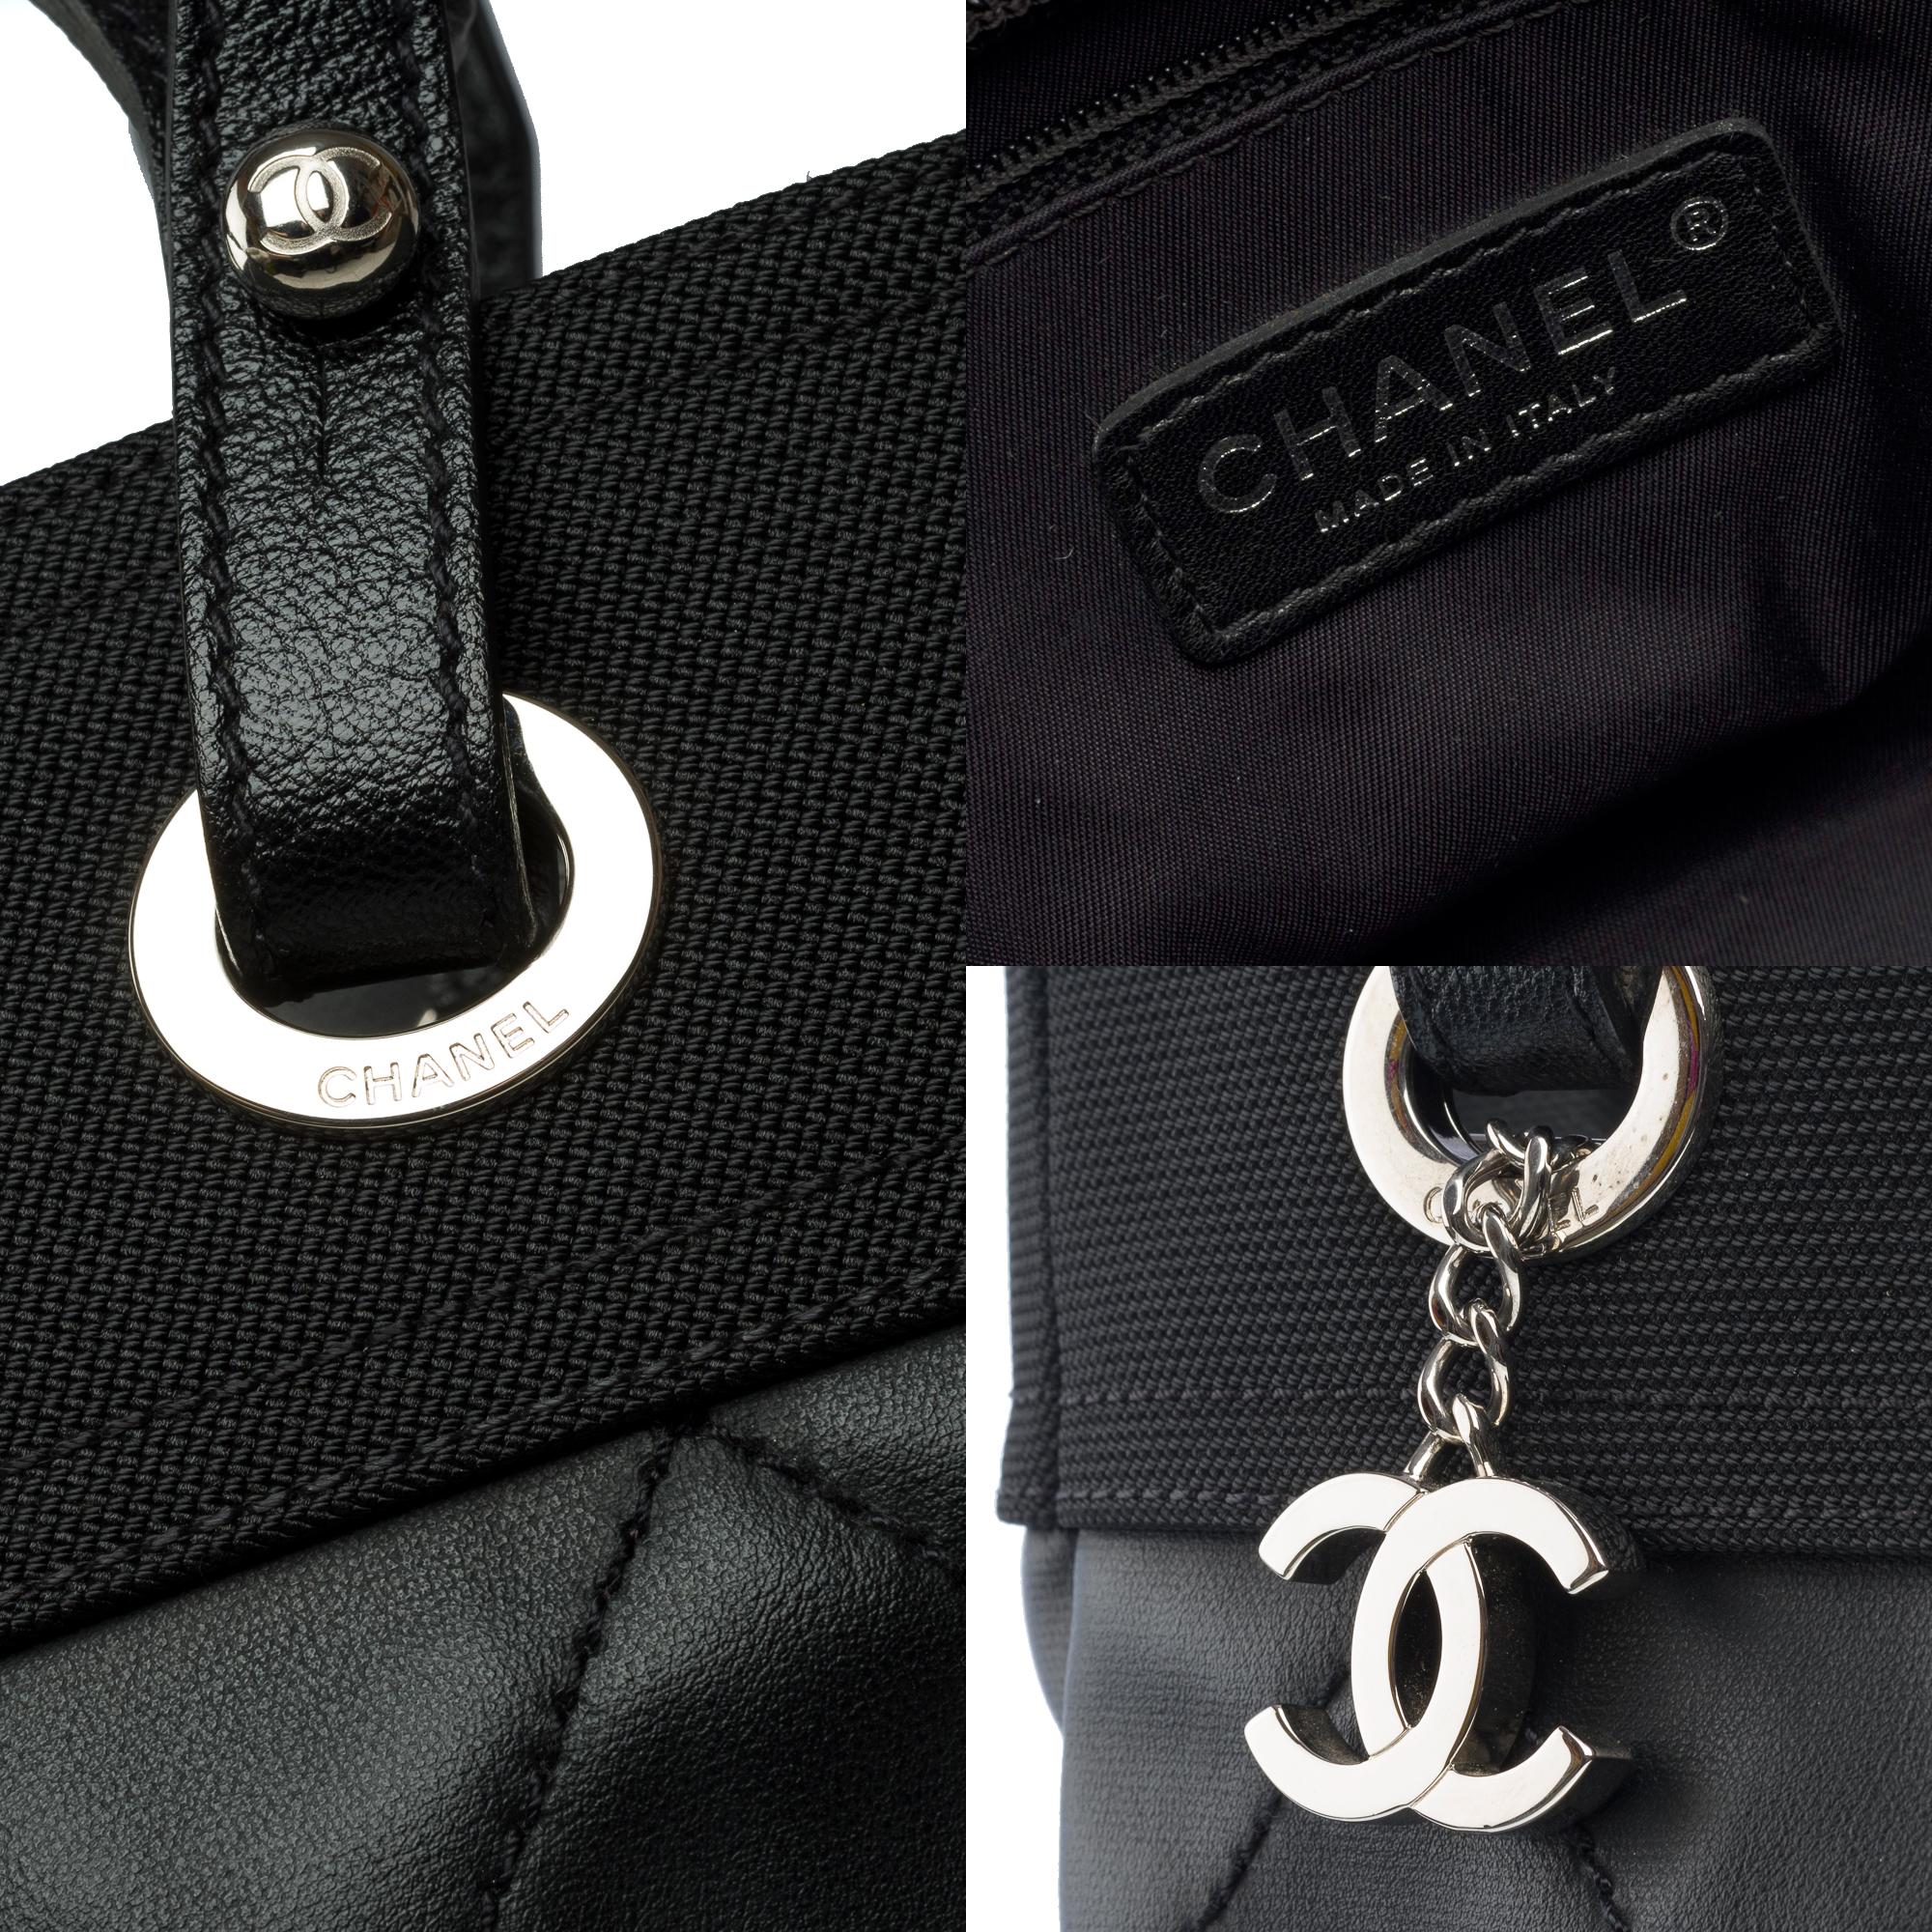  Chanel Paris-Biarritz Tote bag in black coated canvas , SHW For Sale 4